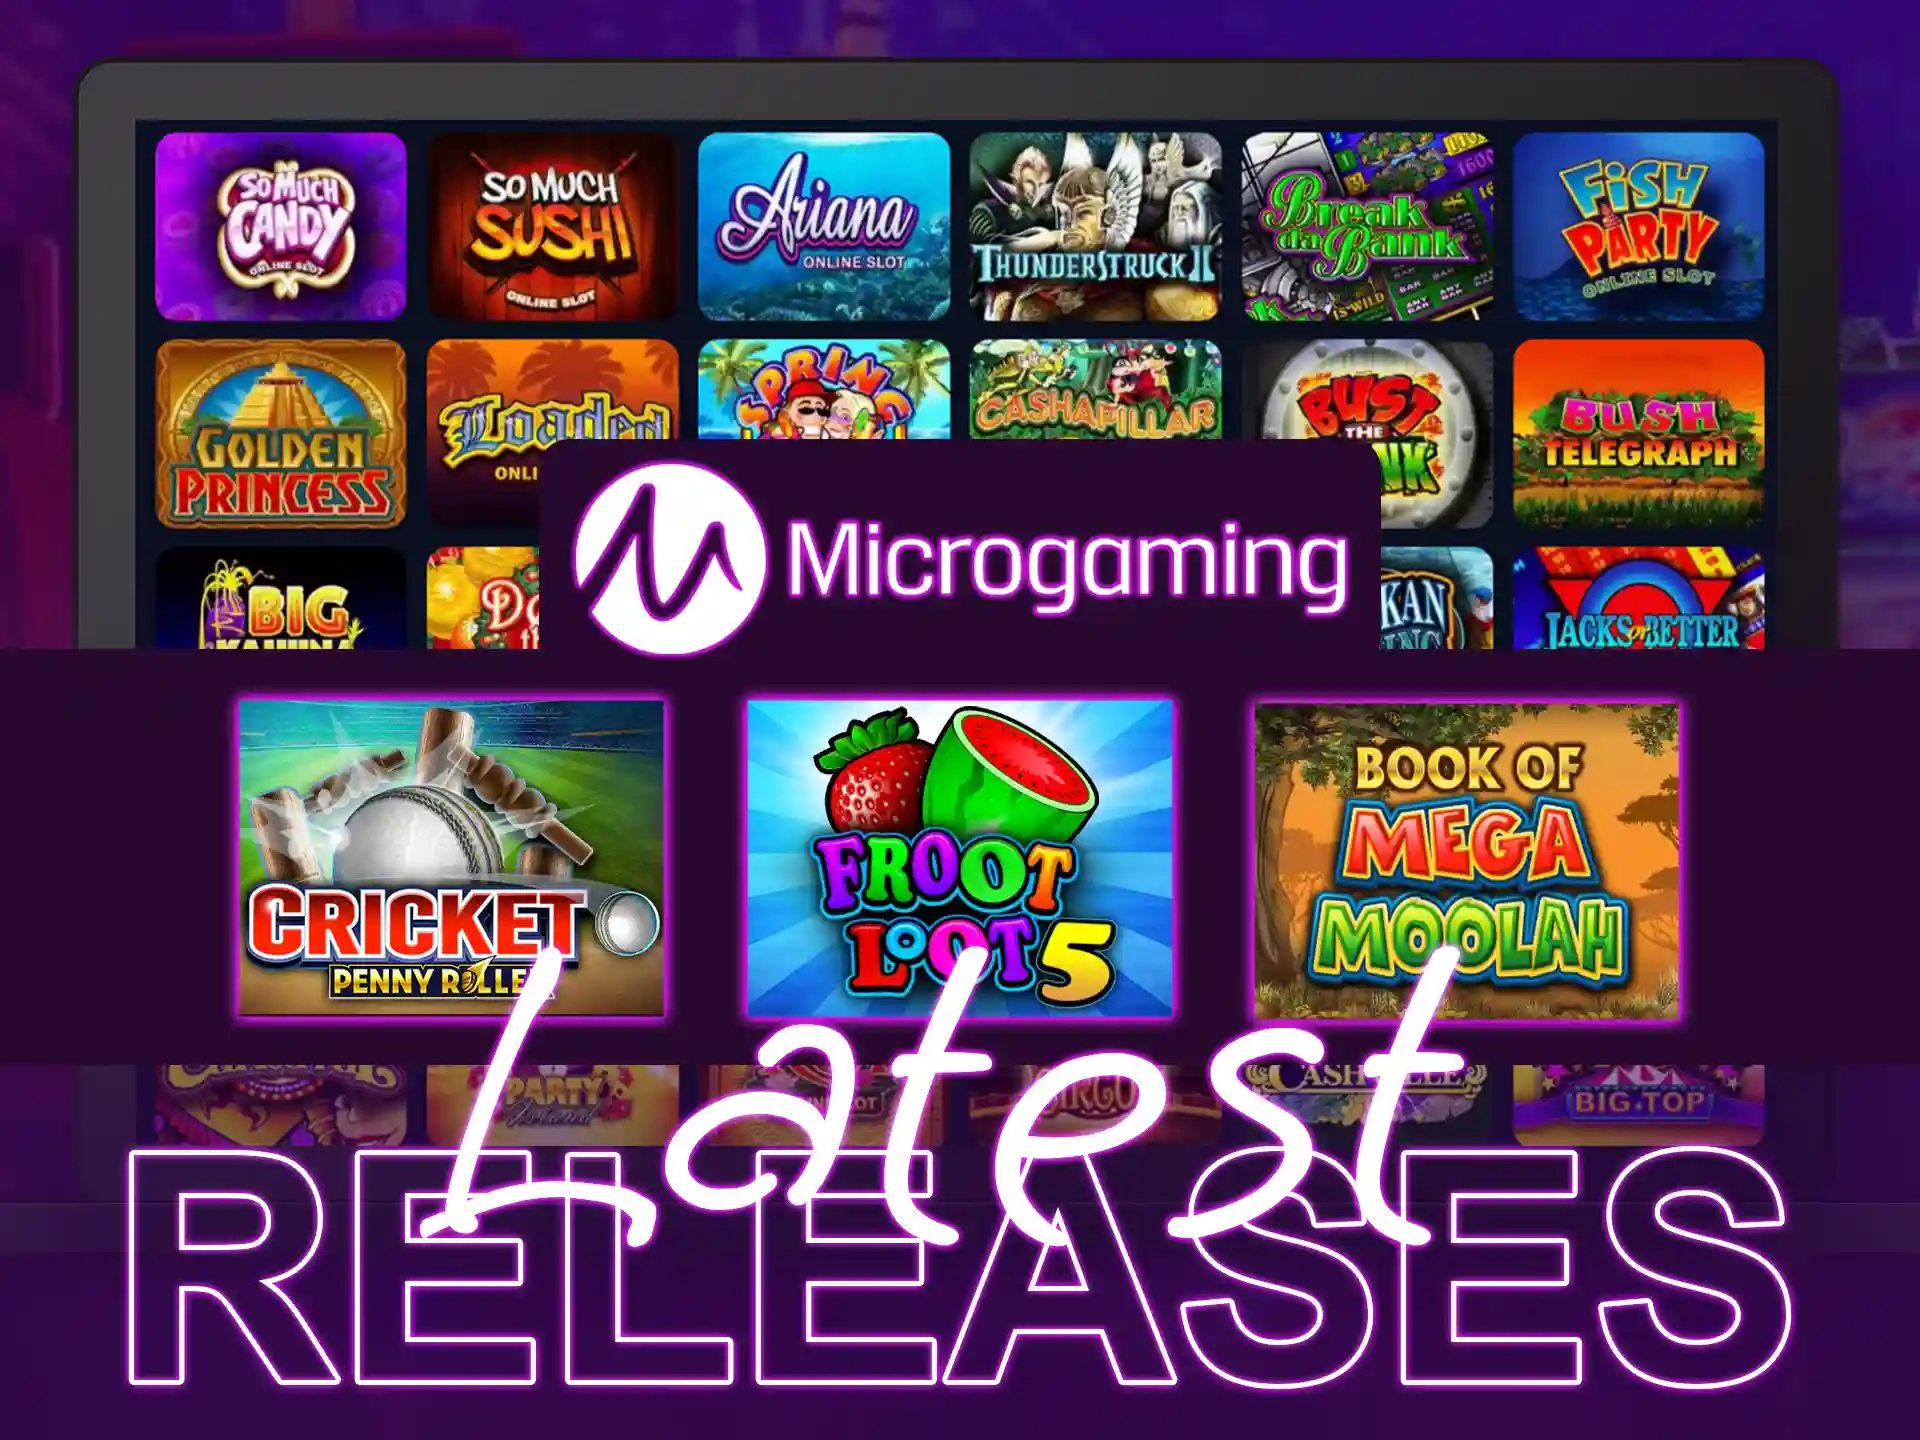 Check out Microgaming's latest gambling releases.